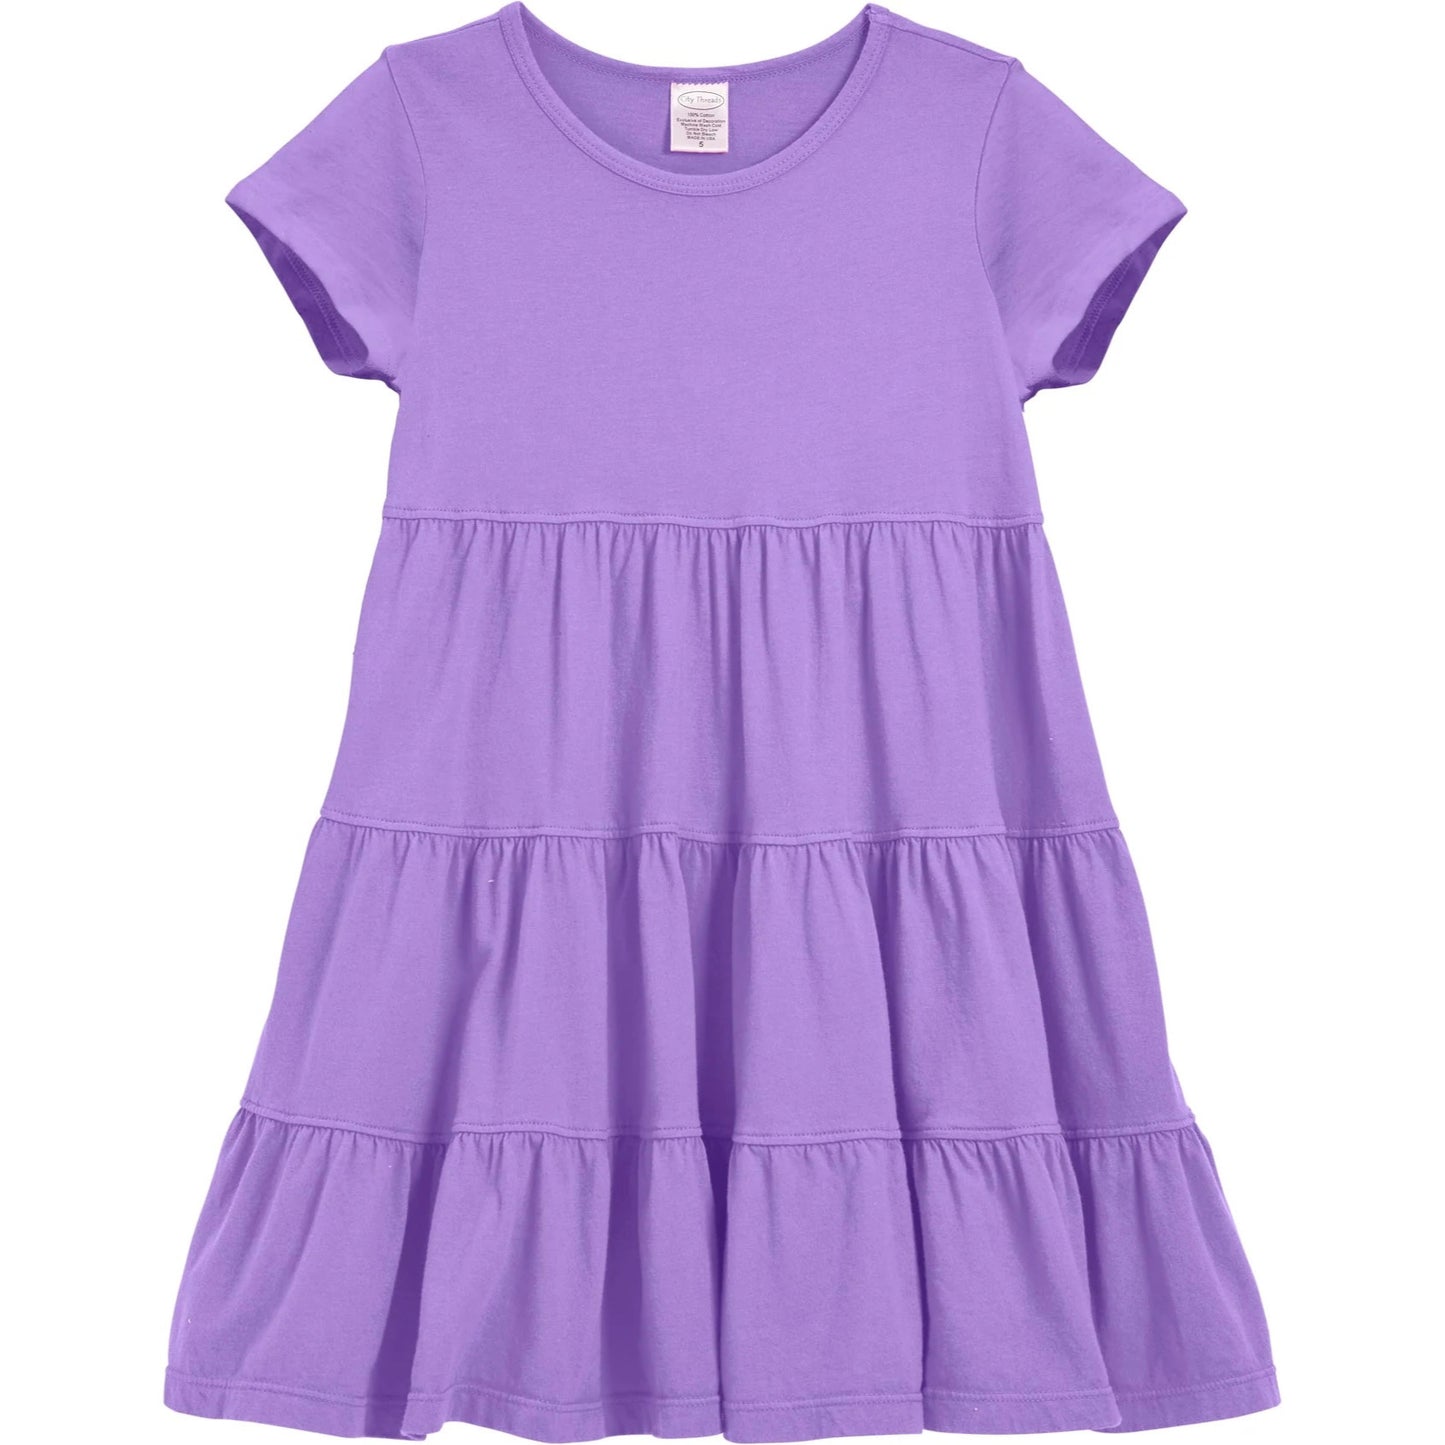 Purple Toddler Dress Made in USA - Baby & Toddler Short Sleeve Cotton Tiered